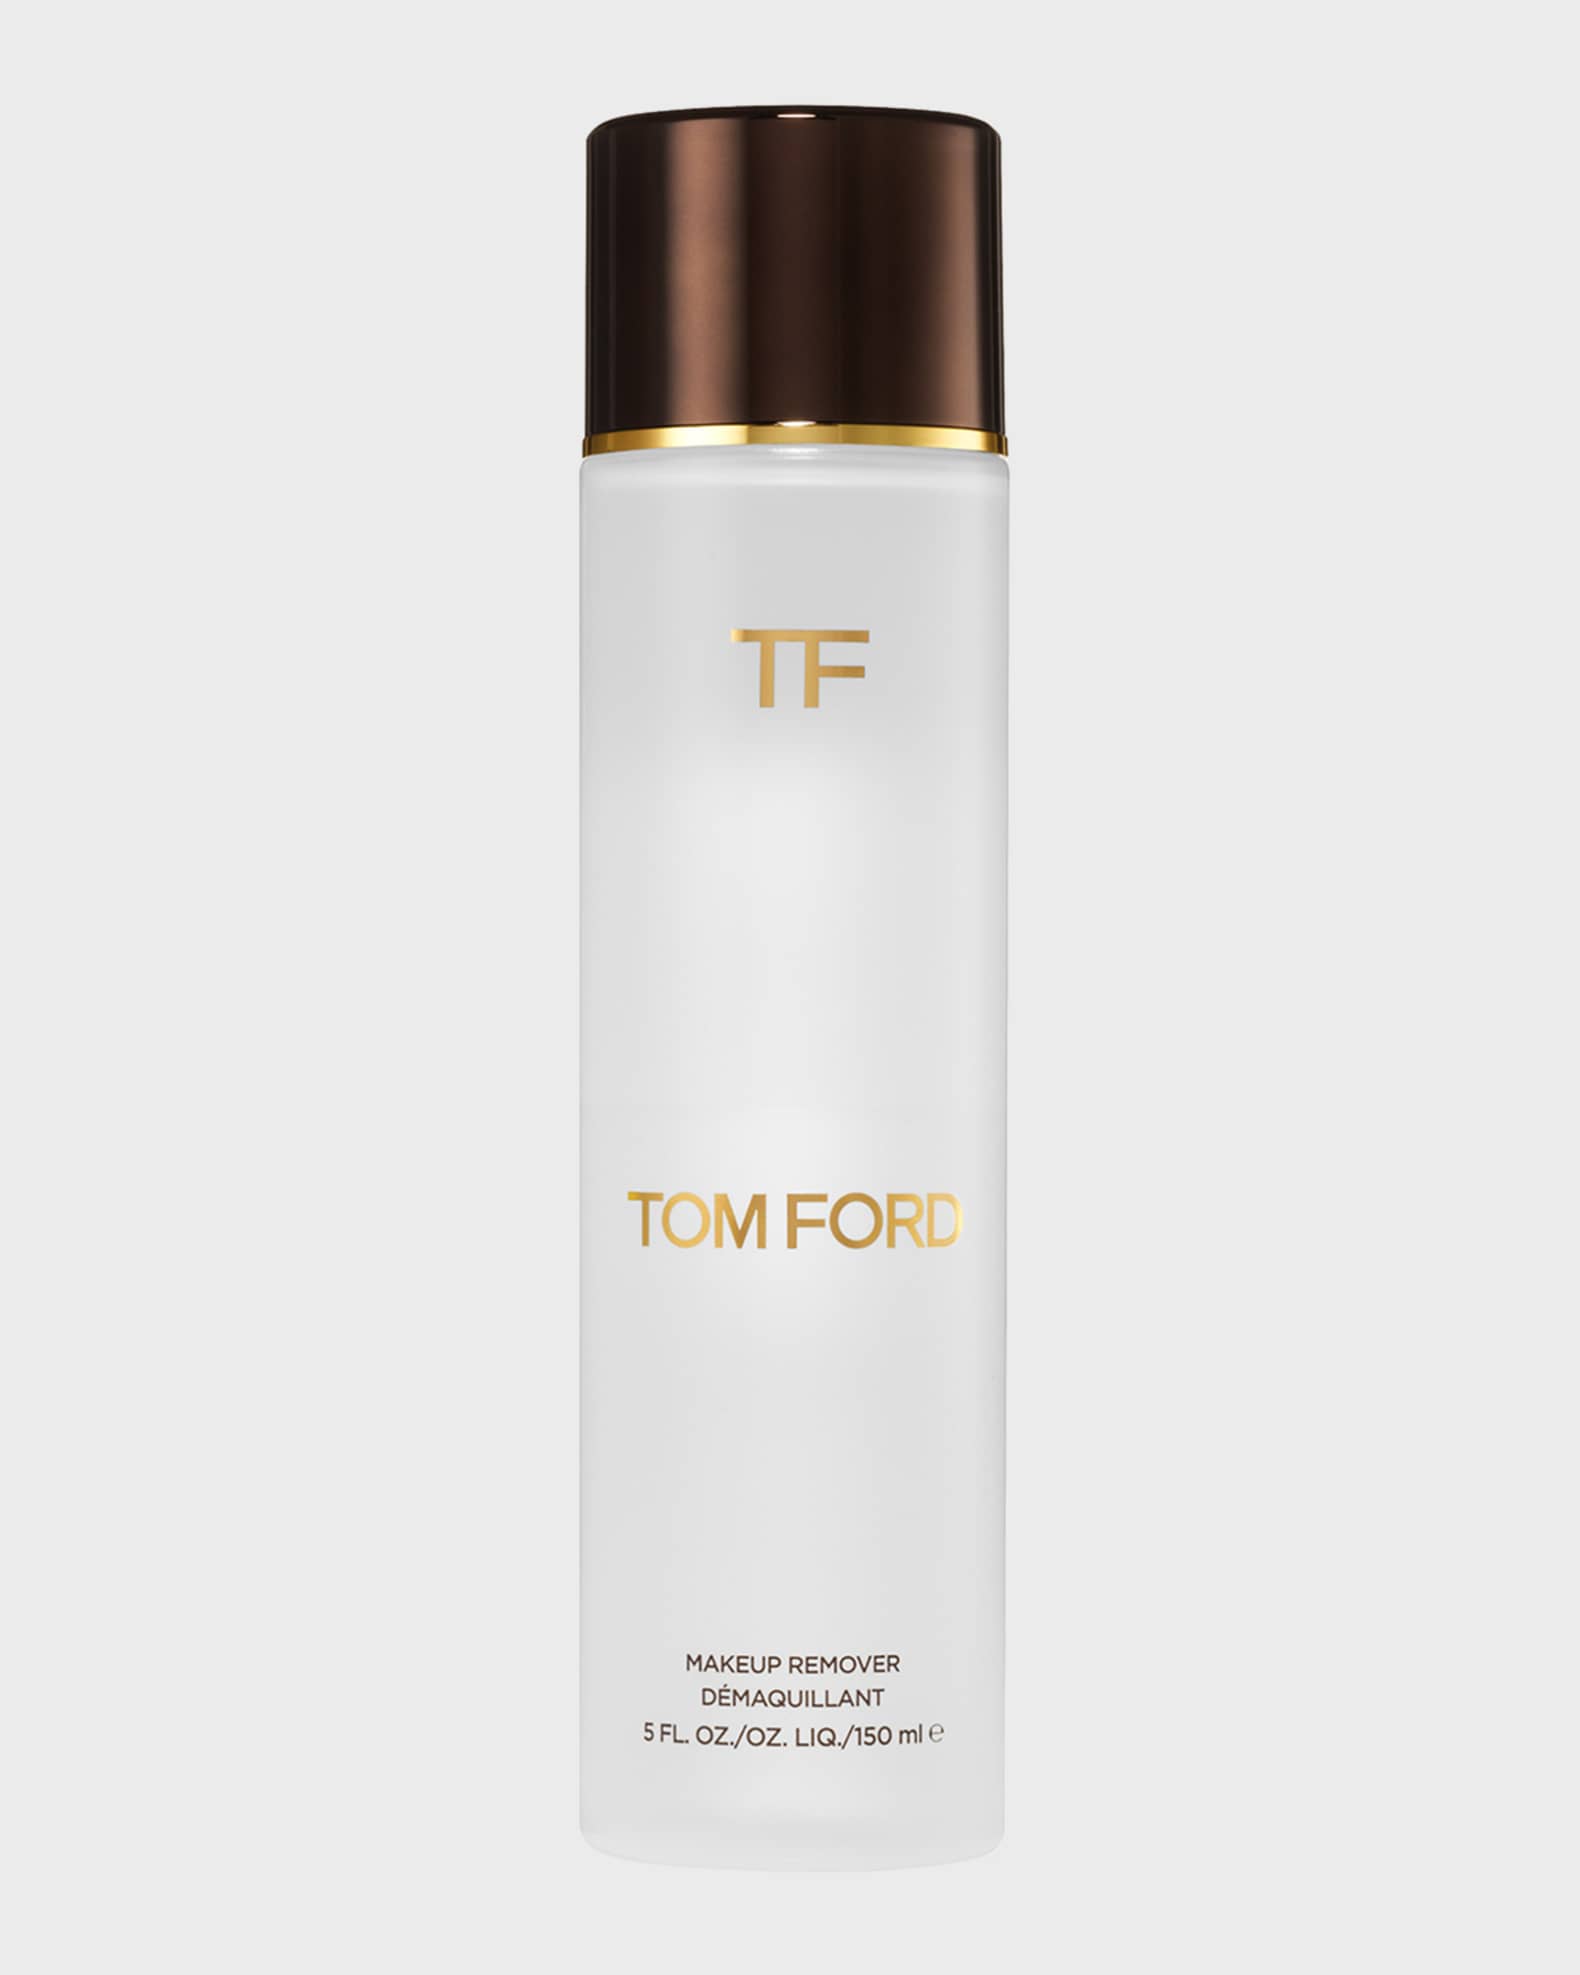 TOM FORD Makeup Remover,  oz./ 150 mL | Neiman Marcus